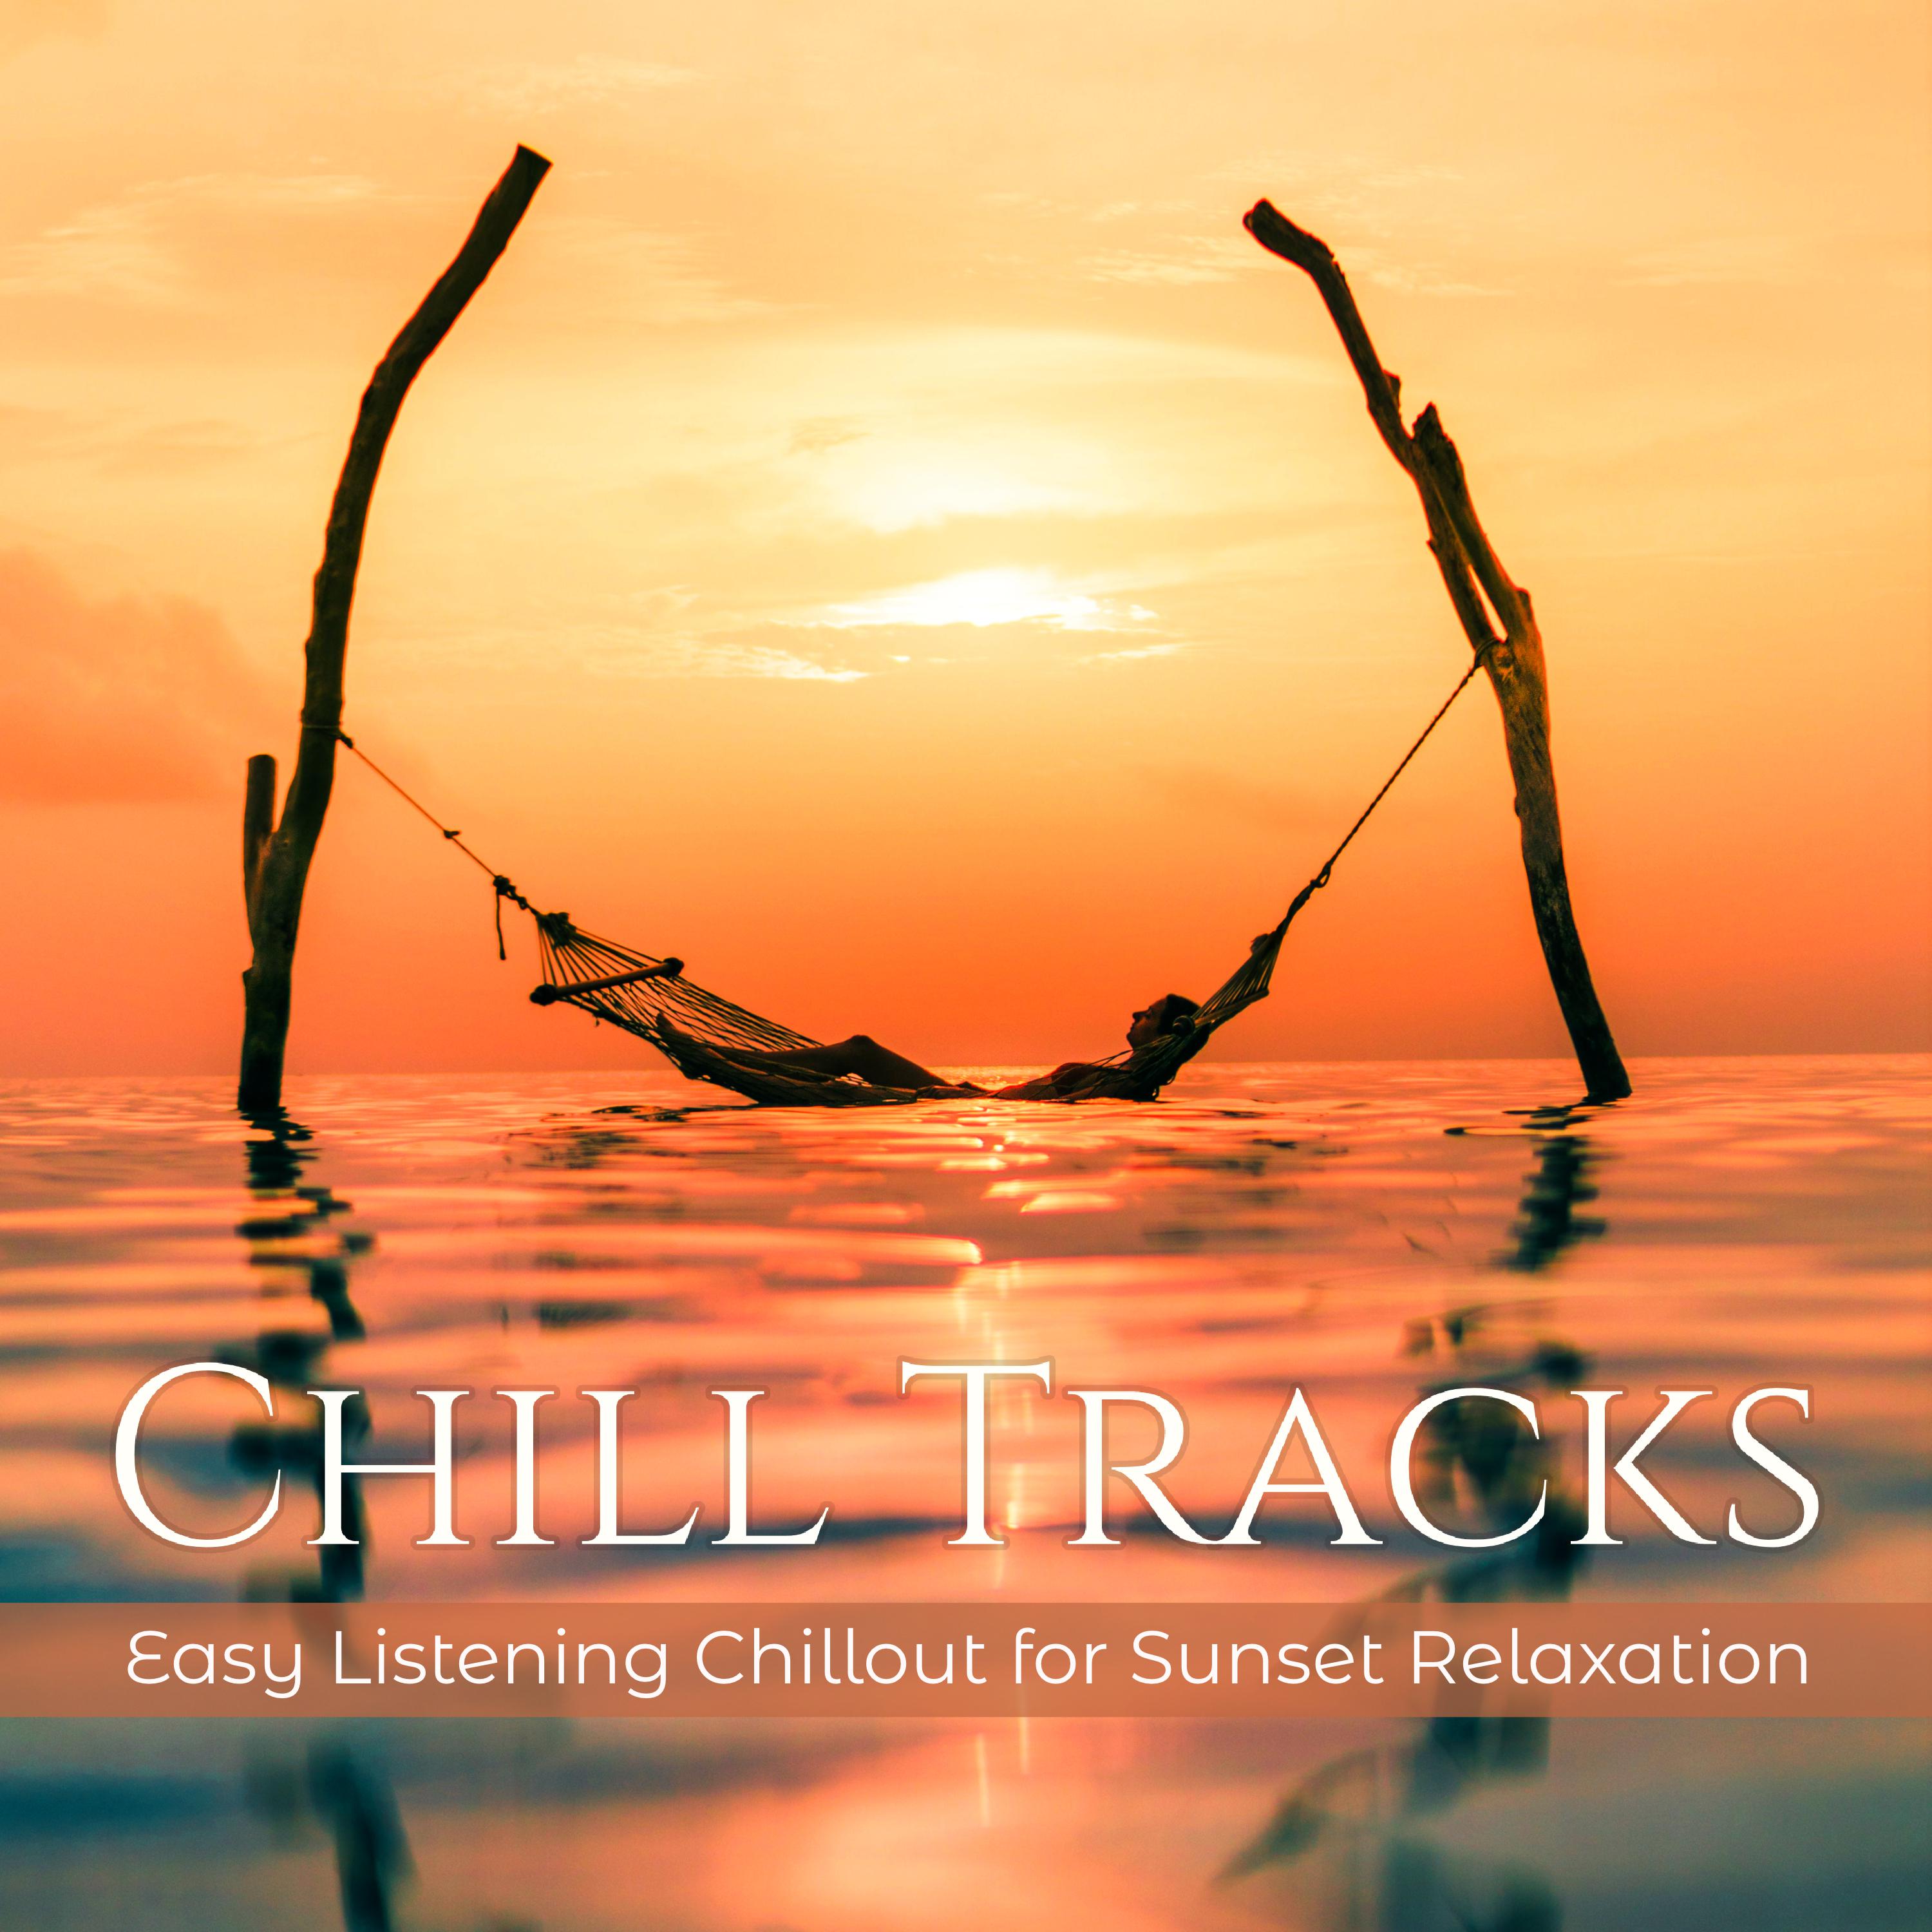 Chill Tracks – Easy Listening Chillout for Sunset Relaxation